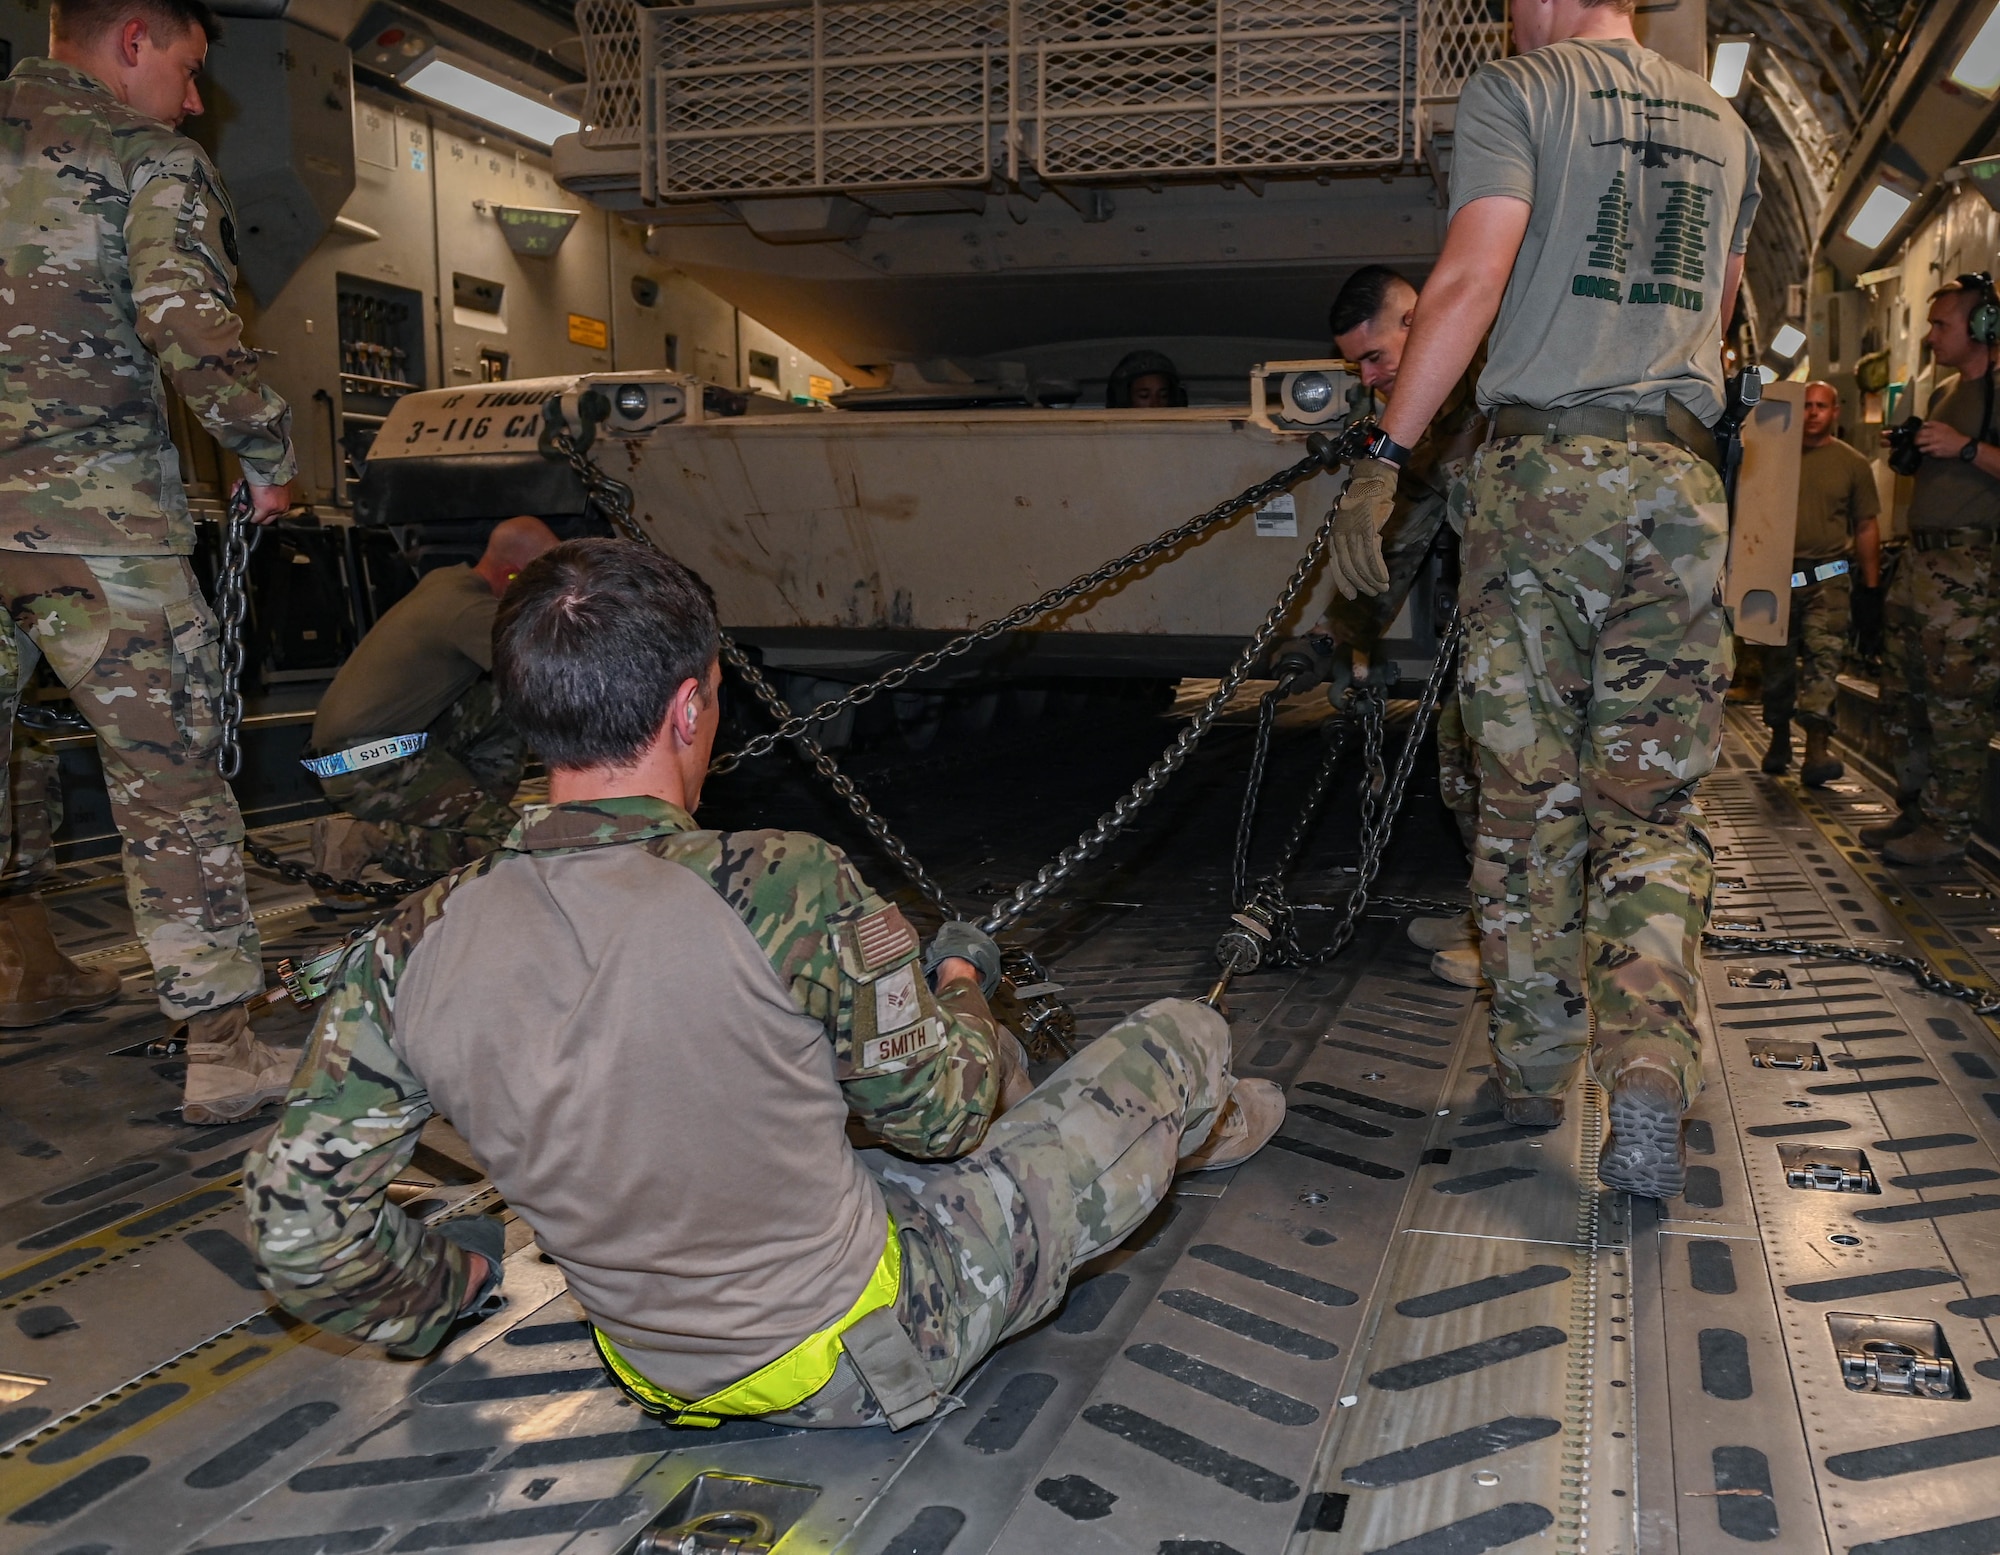 Airmen from the 386th Expeditionary Logistics Readiness Squadron alongside 816th Expeditionary Airlift Squadron loadmasters secure an M-1/A2 Abrams main battle tank aboard a C-17 Globemaster III aircraft Aug 12, 2022 at Ali Al Salem Air Base, Kuwait. The M-1 Abrams tank requires 38 chains to be securely fastened during flight. (U.S. Air National Guard photo by Master Sgt. Michael J. Kelly)